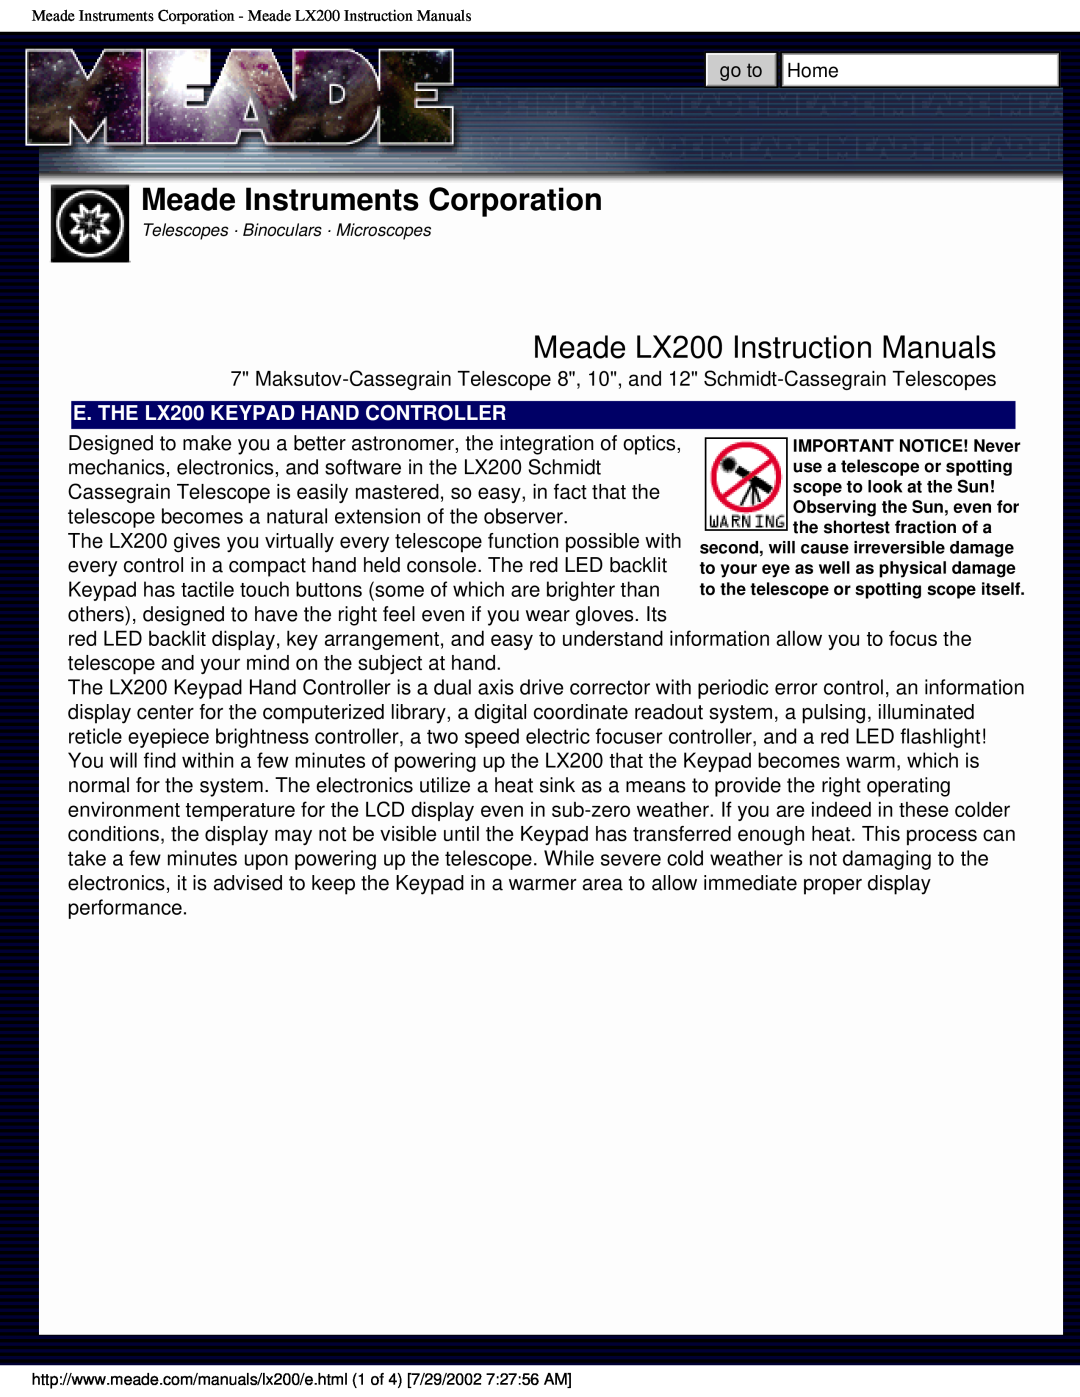 Meade Meade LX200 Instruction Manuals, Meade Instruments Corporation, E. THE LX200 KEYPAD HAND CONTROLLER 